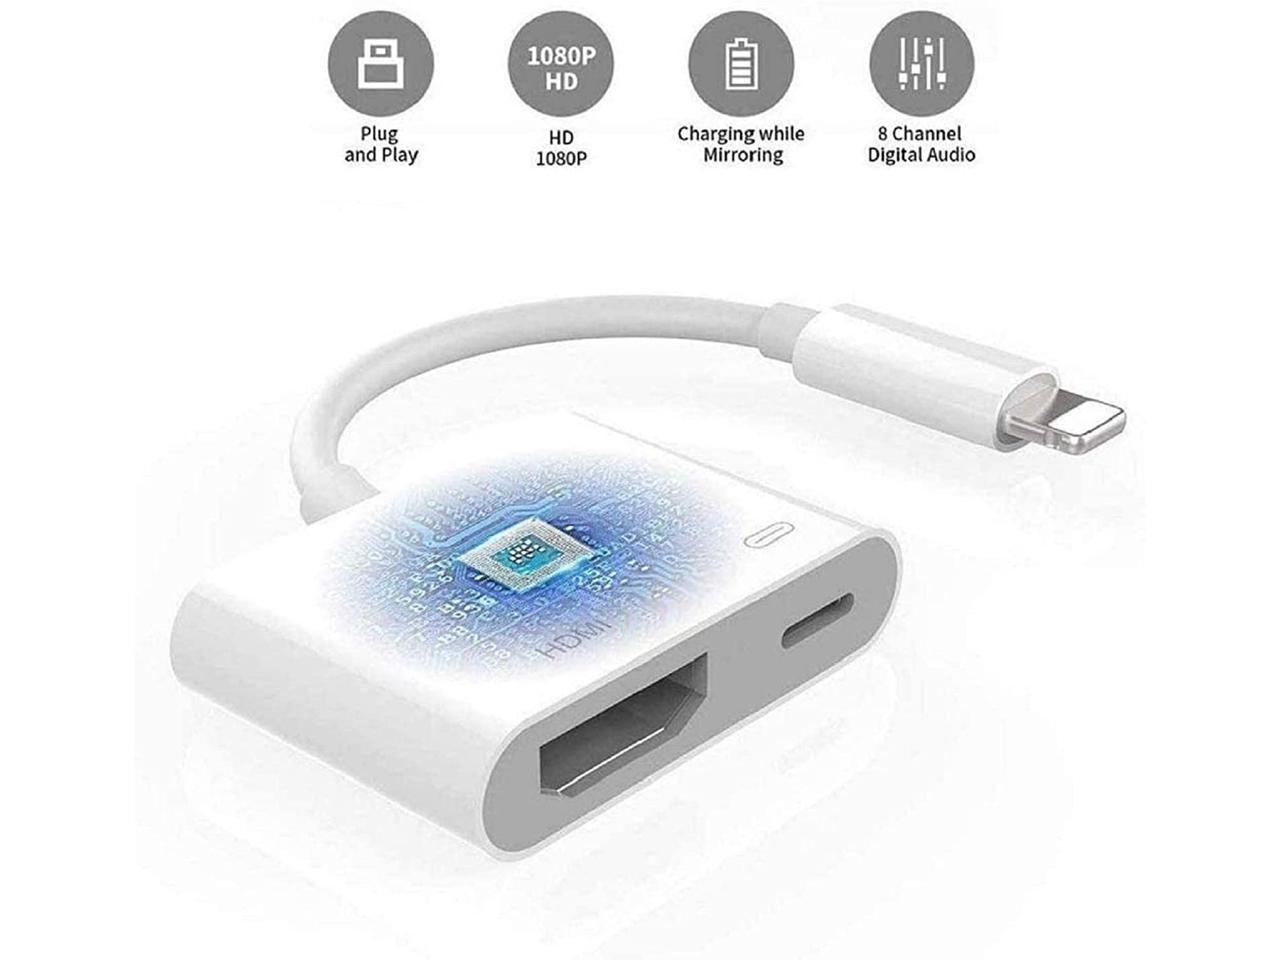 iPad on HDTV/Monitor/Projector 4K Video & Audio HDMI Sync Screen Converter with Charging Port for iPhone 11/SE/X/7 Lightning to 1080P Digital AV Adapter Apple MFi Certified Apple Lightning to HDMI